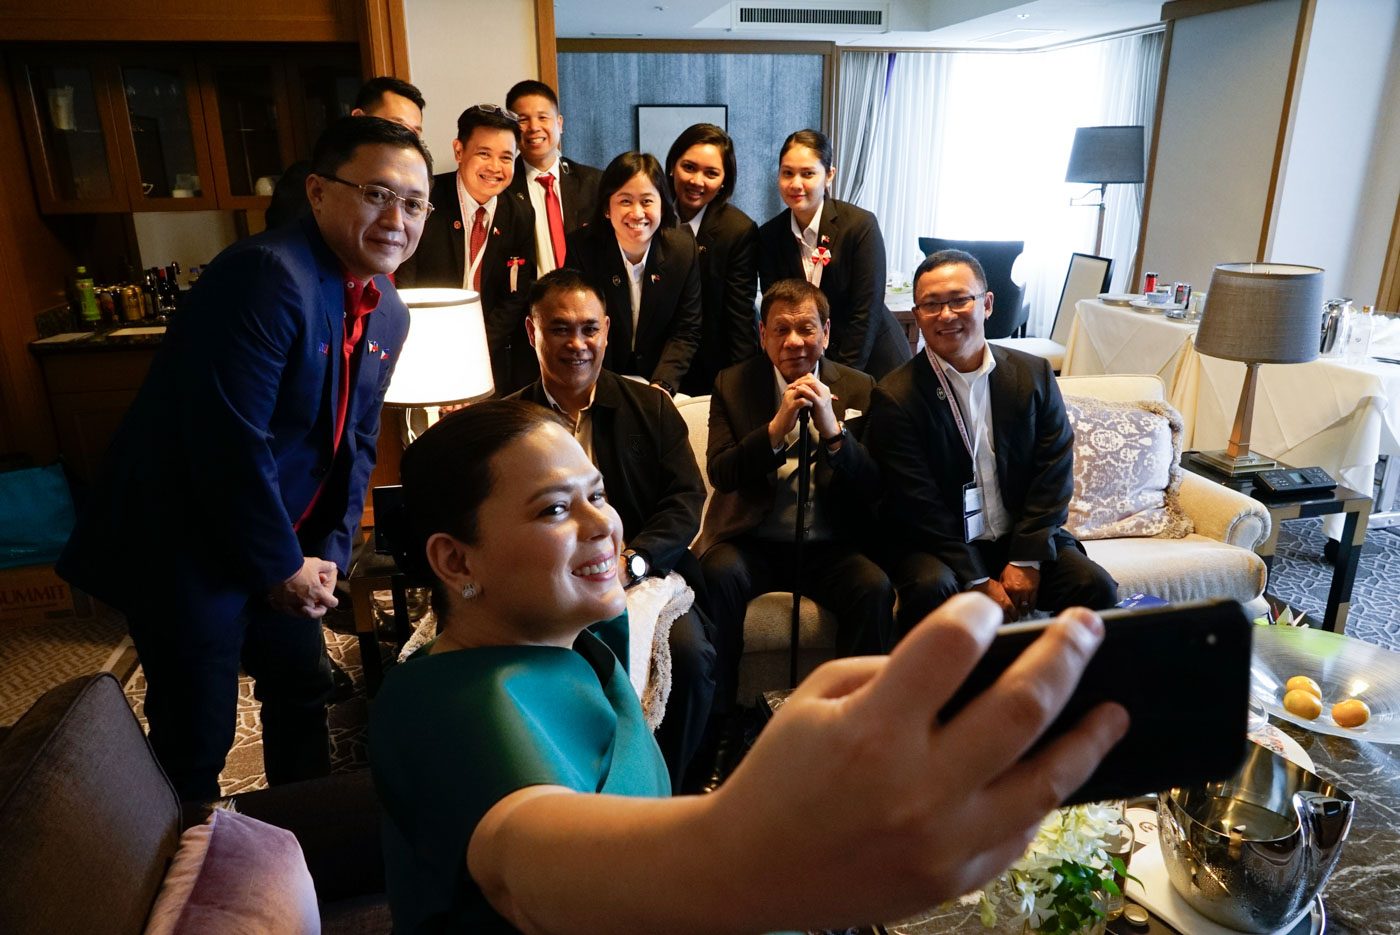 GROUP PHOTO. Davao Cit Mayor Sar Duterte takes a photo with the presidential delegation to the enthronment of Emperor Naruhito in Tokyo, Japan, on October 22, 2019. Her father holds a cane to support is aching back. Malacanang Photo 